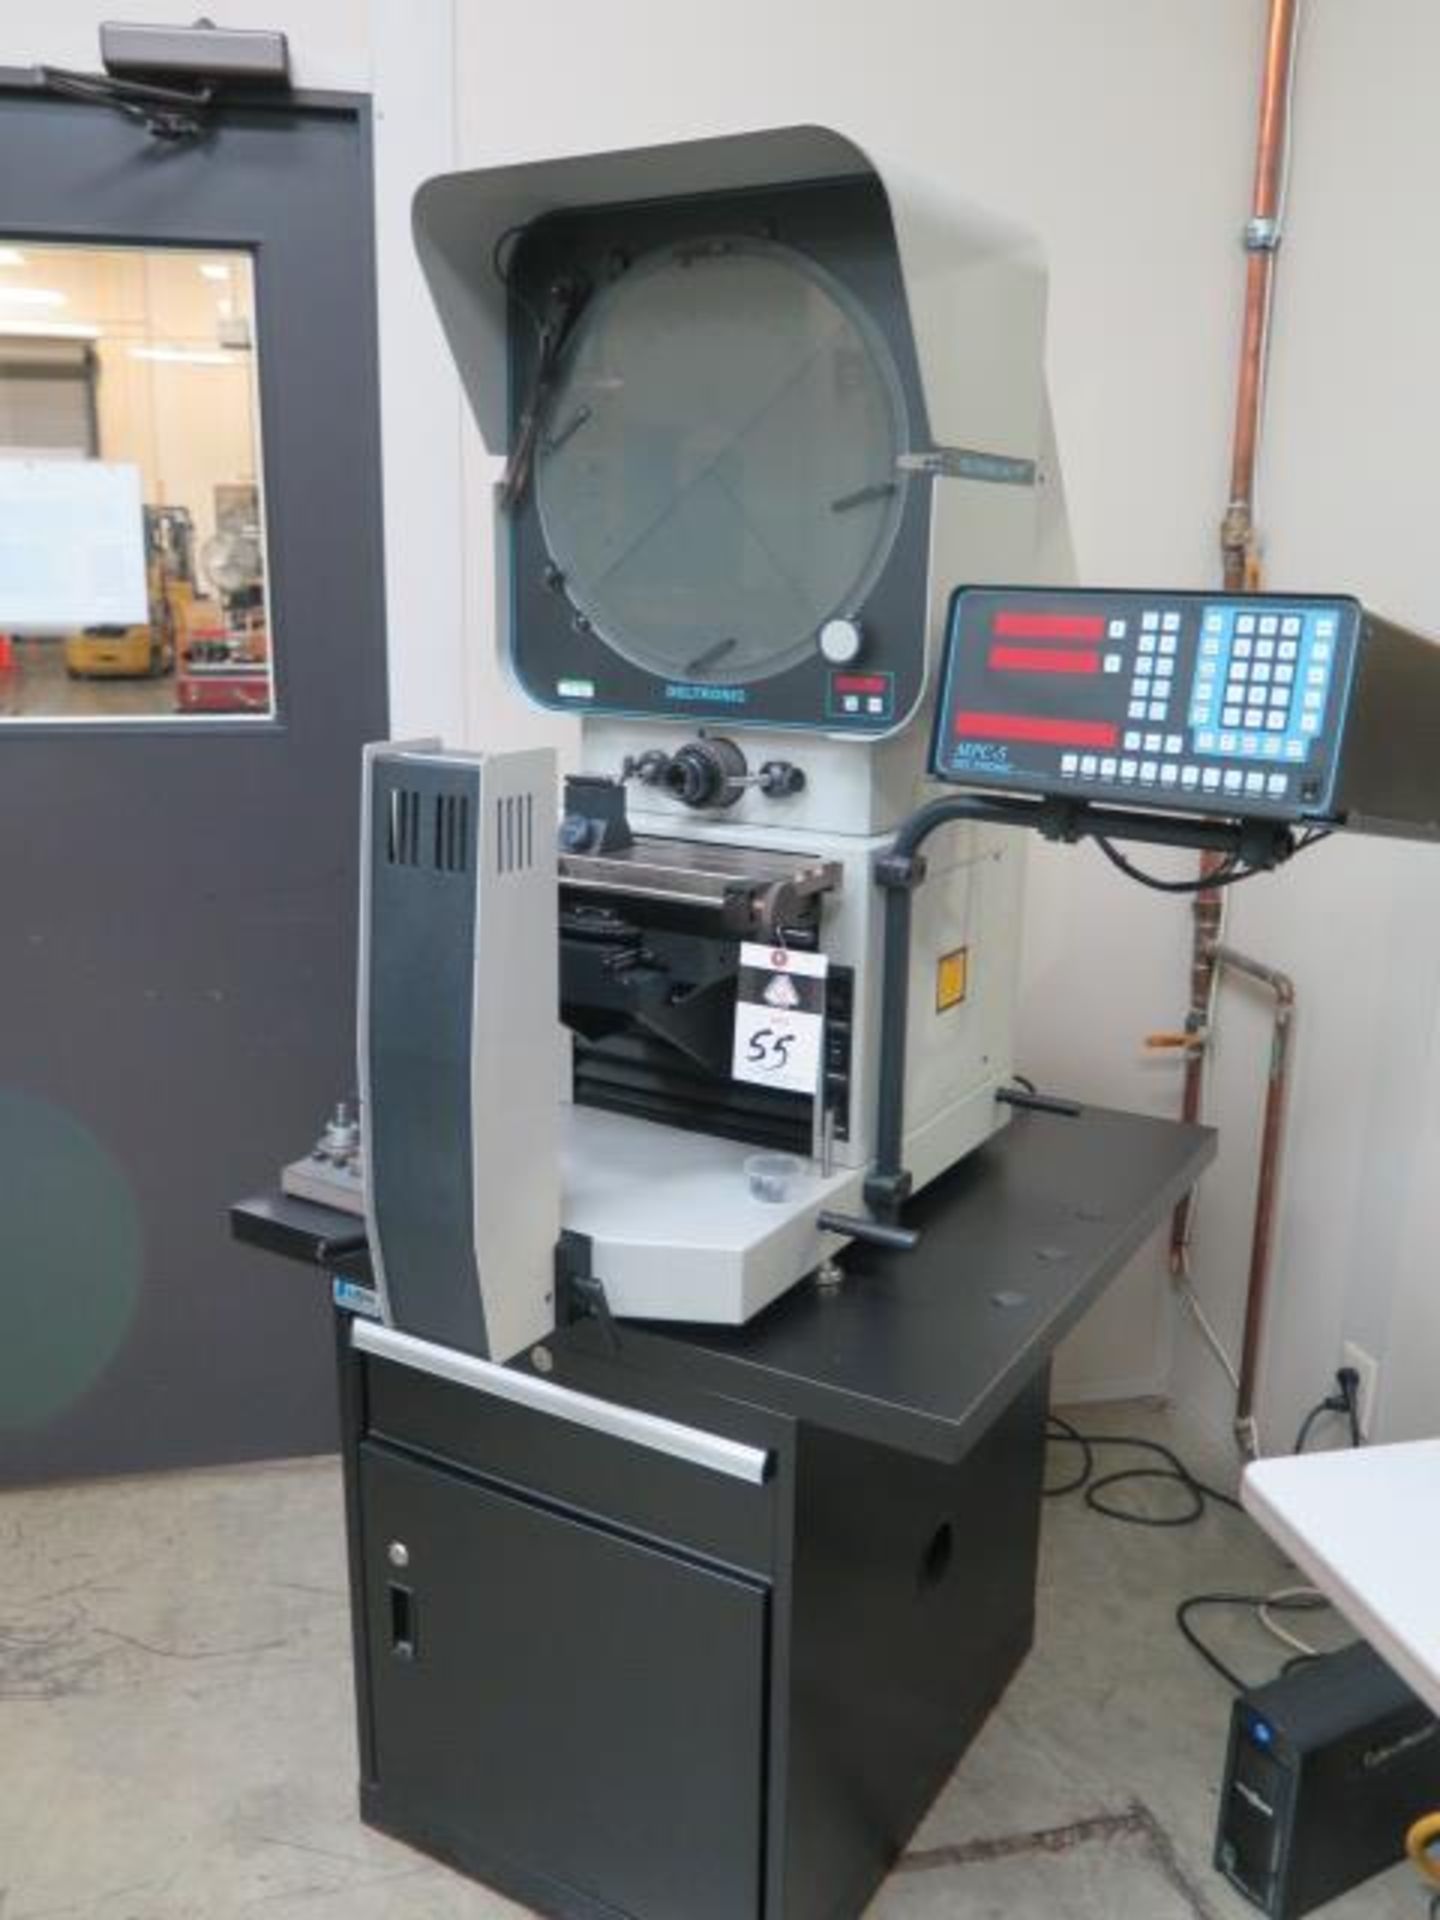 Deltronic DH216-MPC5 15” Optical Comparator s/n 389045807 w/ MPC-5 Programmable DRO, SOLD AS IS - Image 2 of 13